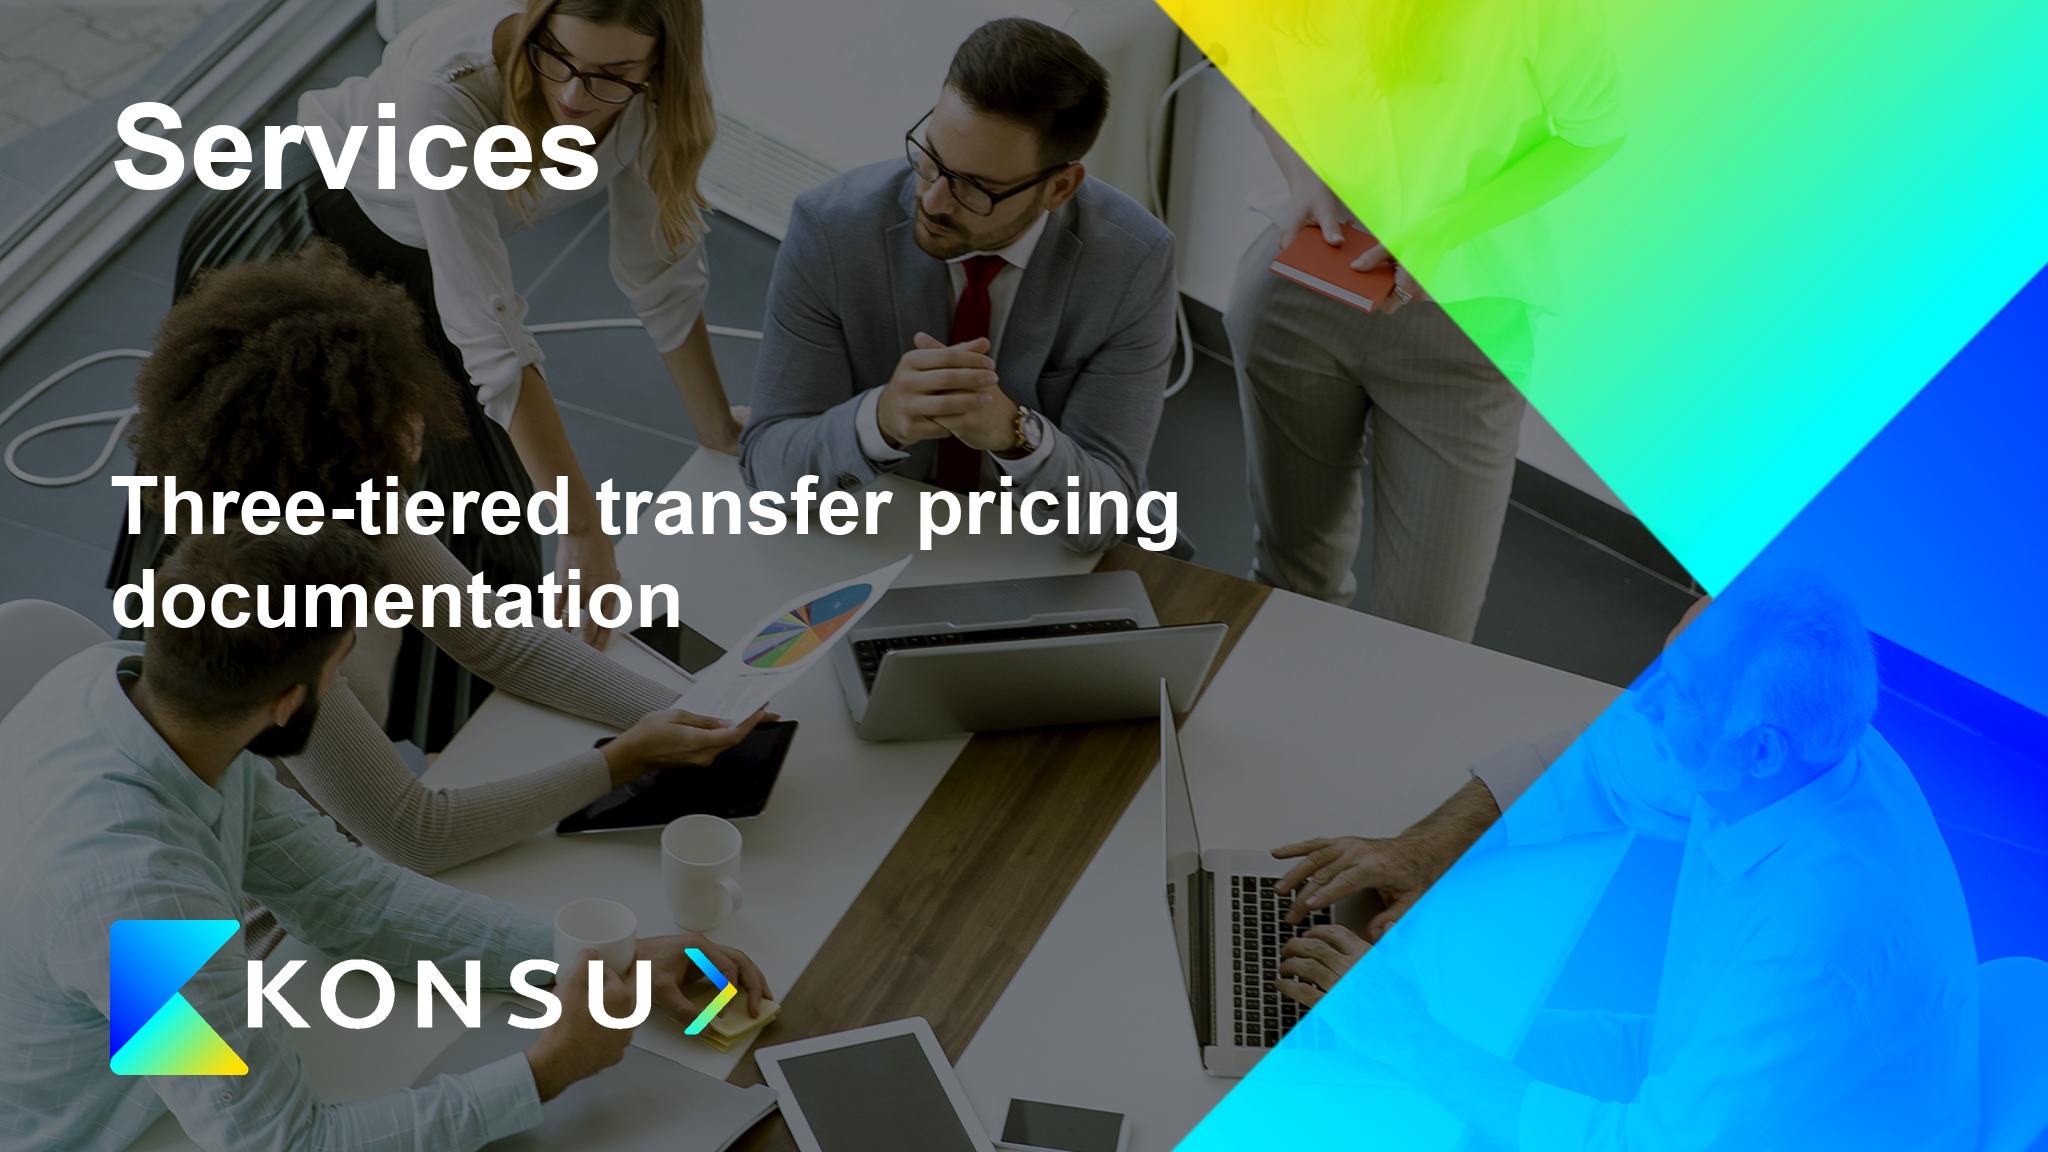 Threetiered transfer pricing documentation en konsu outsourcing 